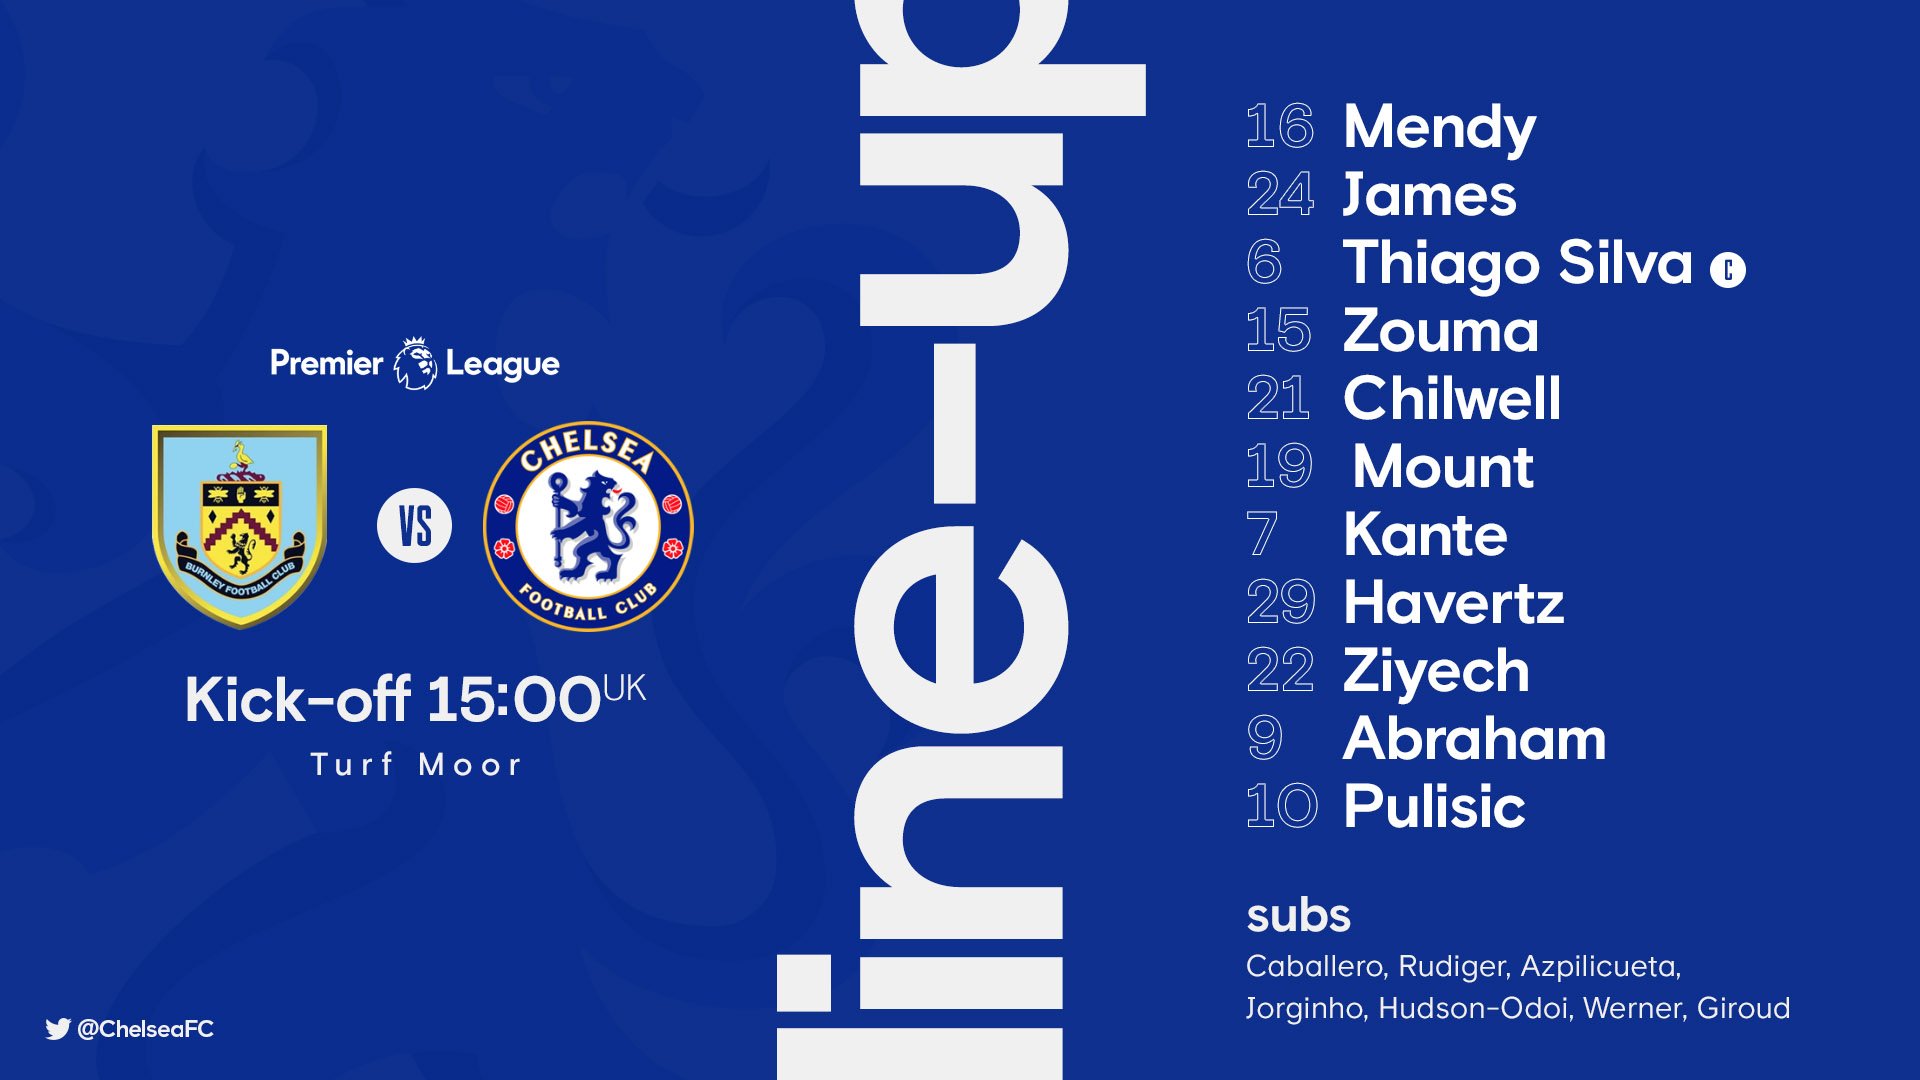 Christian Pulisic replaced by Timo Werner in Chelsea team for Burnley clash after suffering injury in warm-up - Bóng Đá